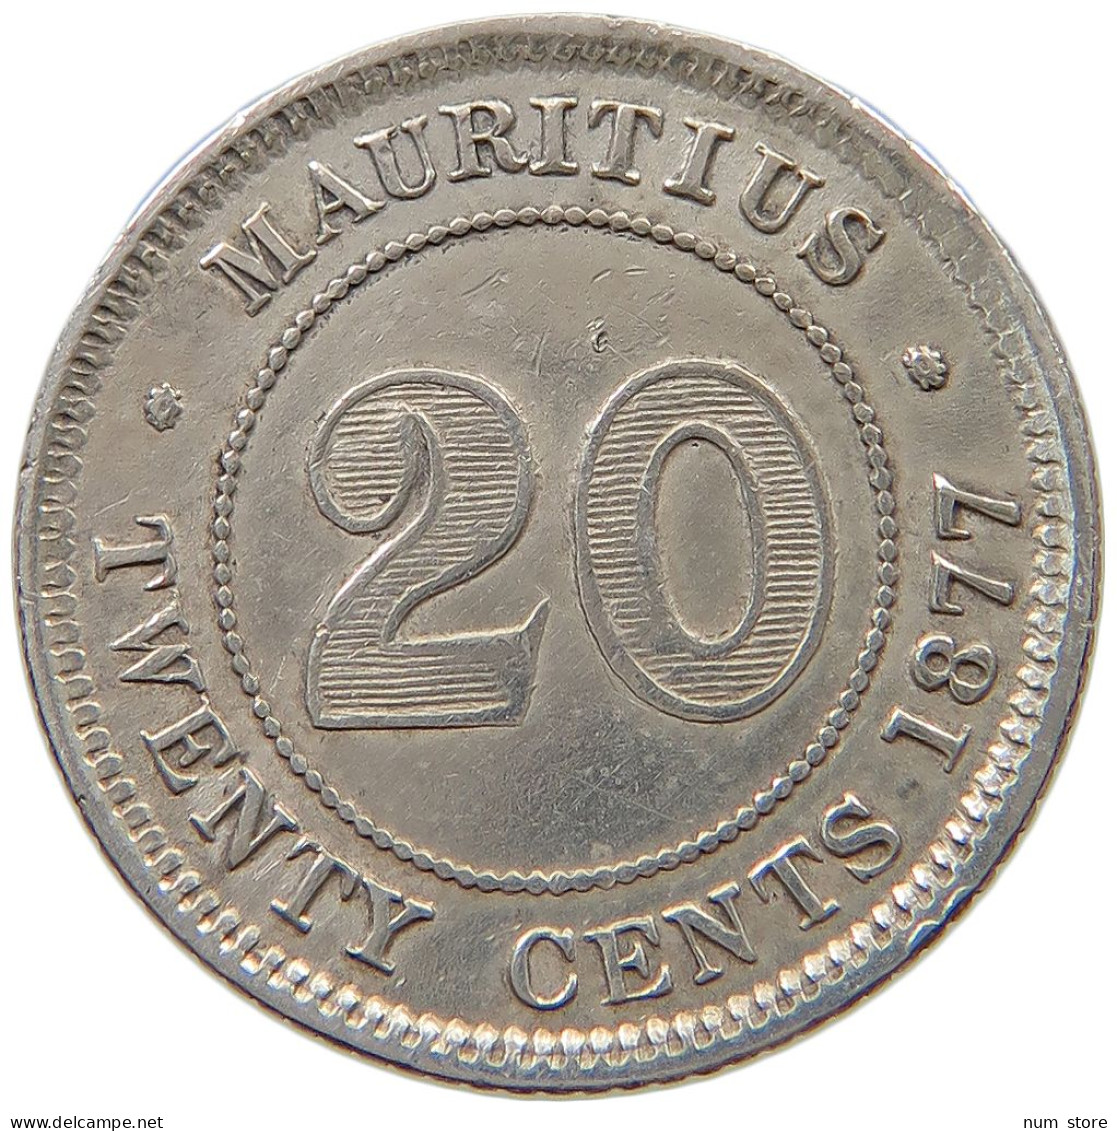 MAURITIUS 20 CENTS 1877 H Victoria 1837-1901 #t108 0115 - Maurice